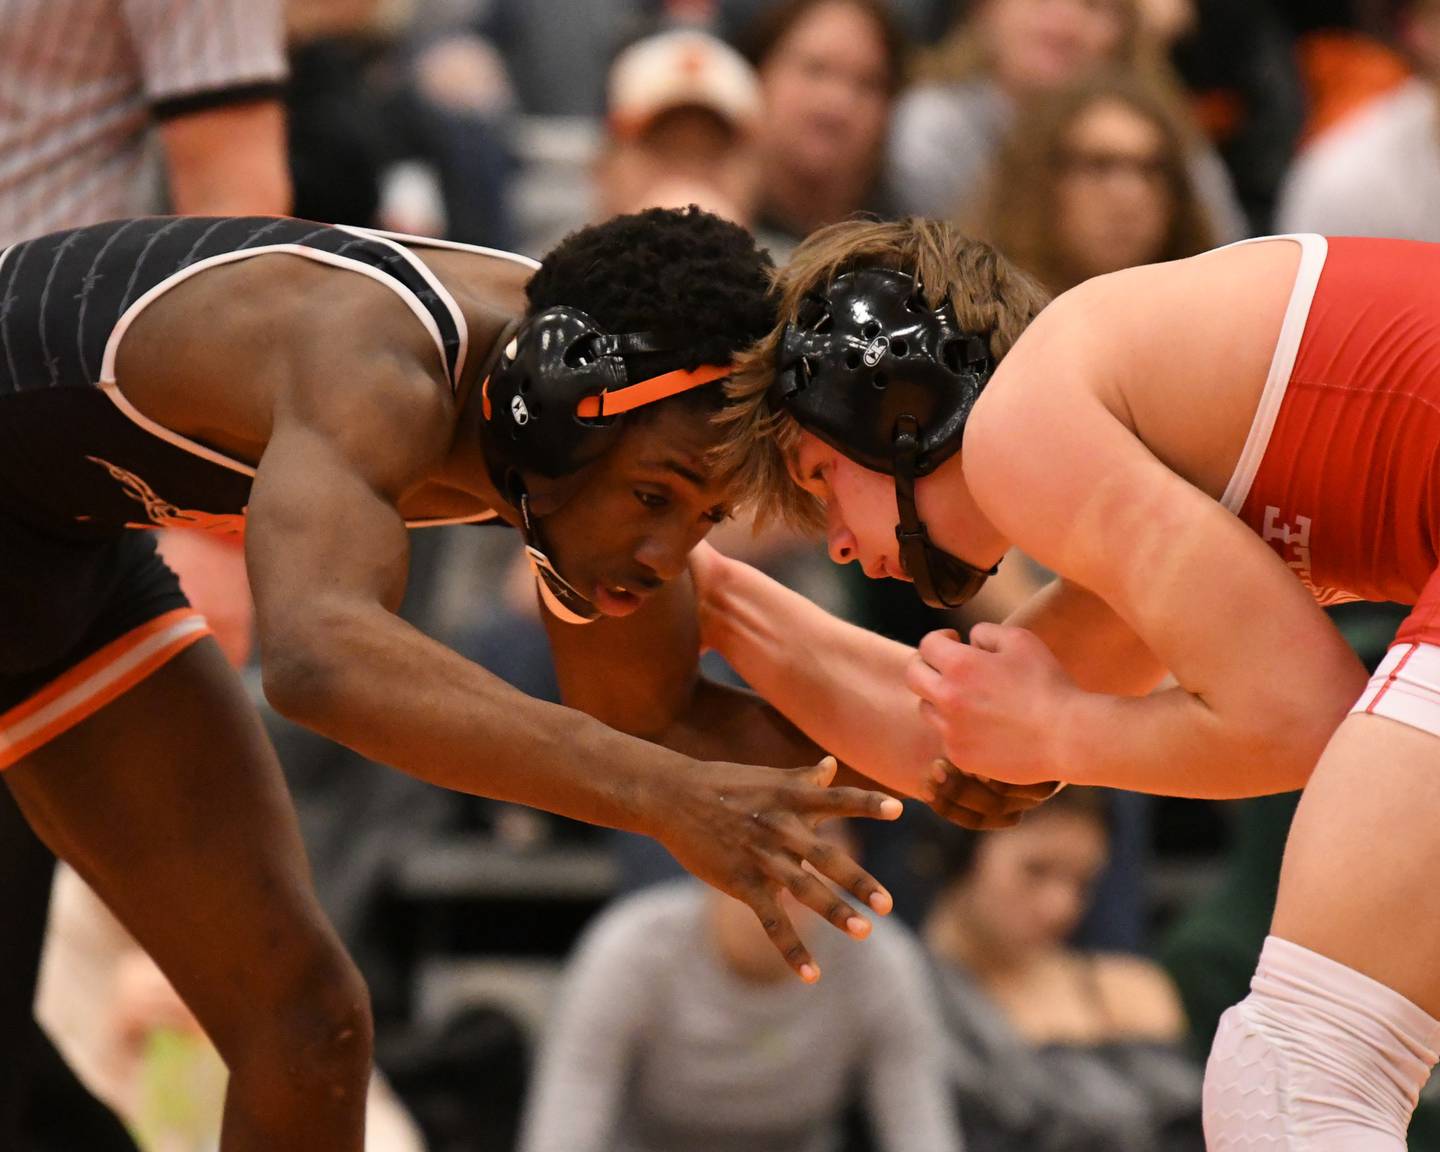 Nathan Craft of Yorkville wrestles against Jalen Airhart of DeKalb in the 120 weight class on Friday Dec. 30th during The Don Flavin wrestling Invite held at DeKalb High School.